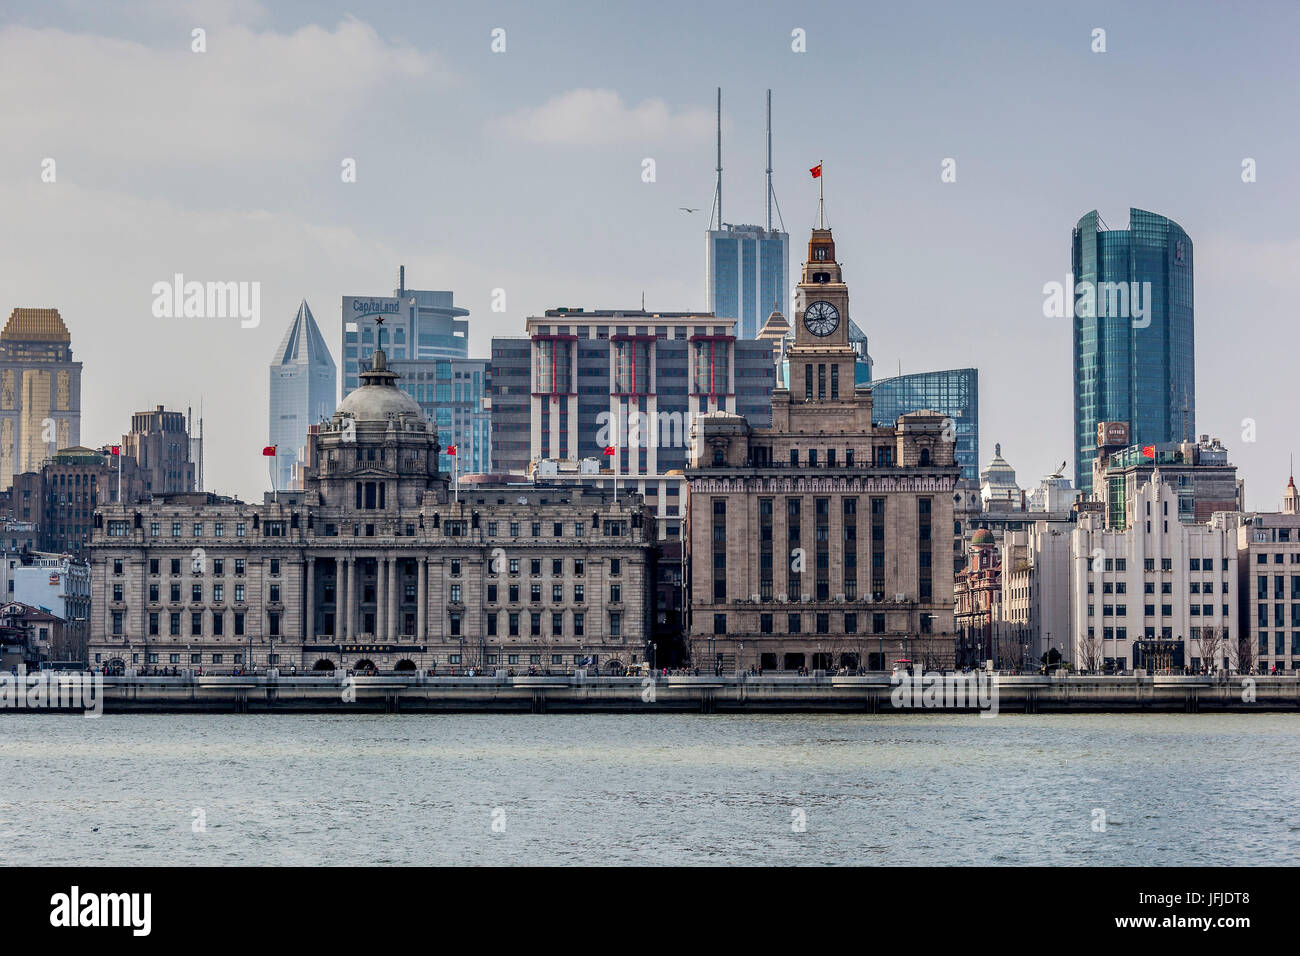 The Bund / Colonial Buildings / Historical 1920's Architecture, Shanghai, China Stock Photo